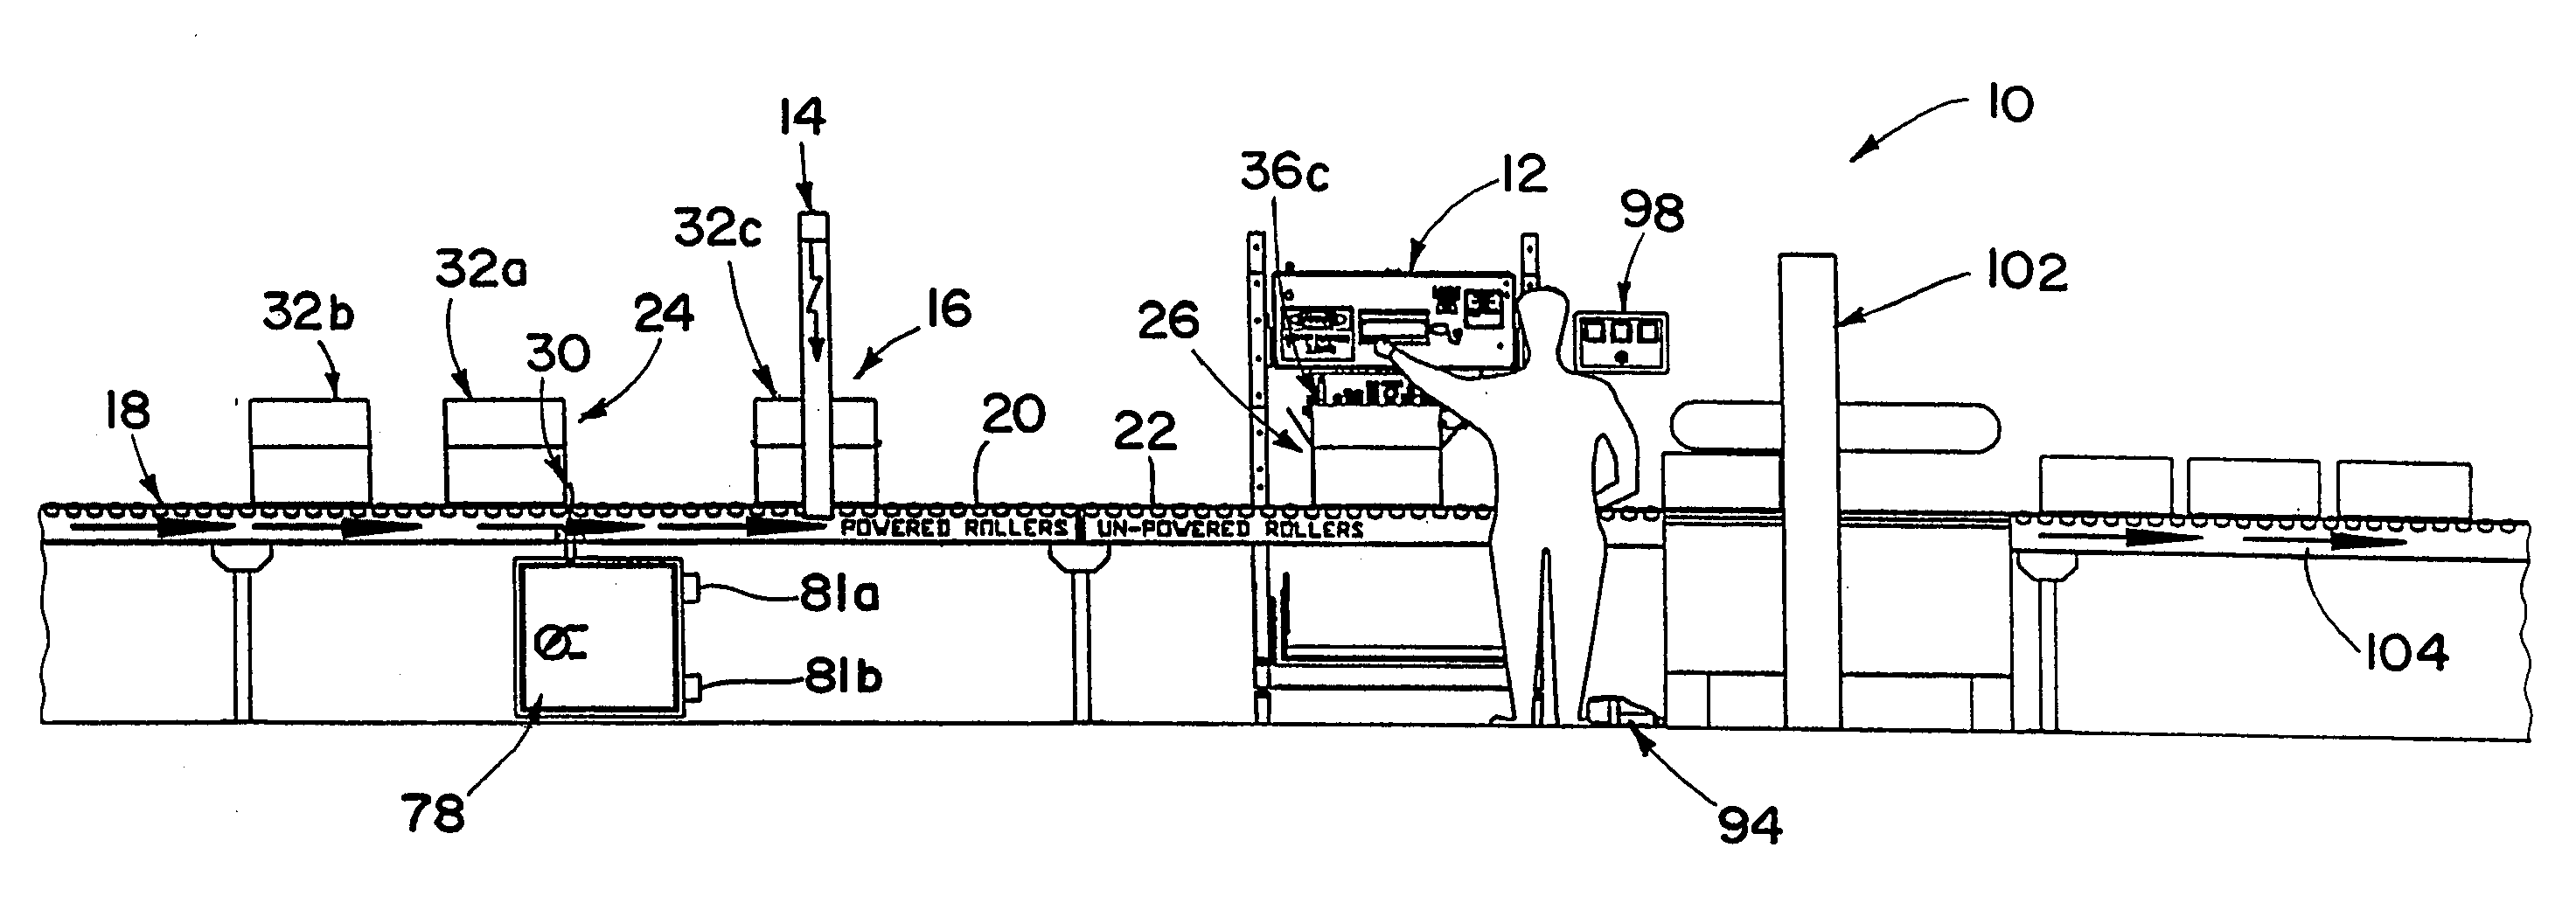 Packaging system with void fill measurement